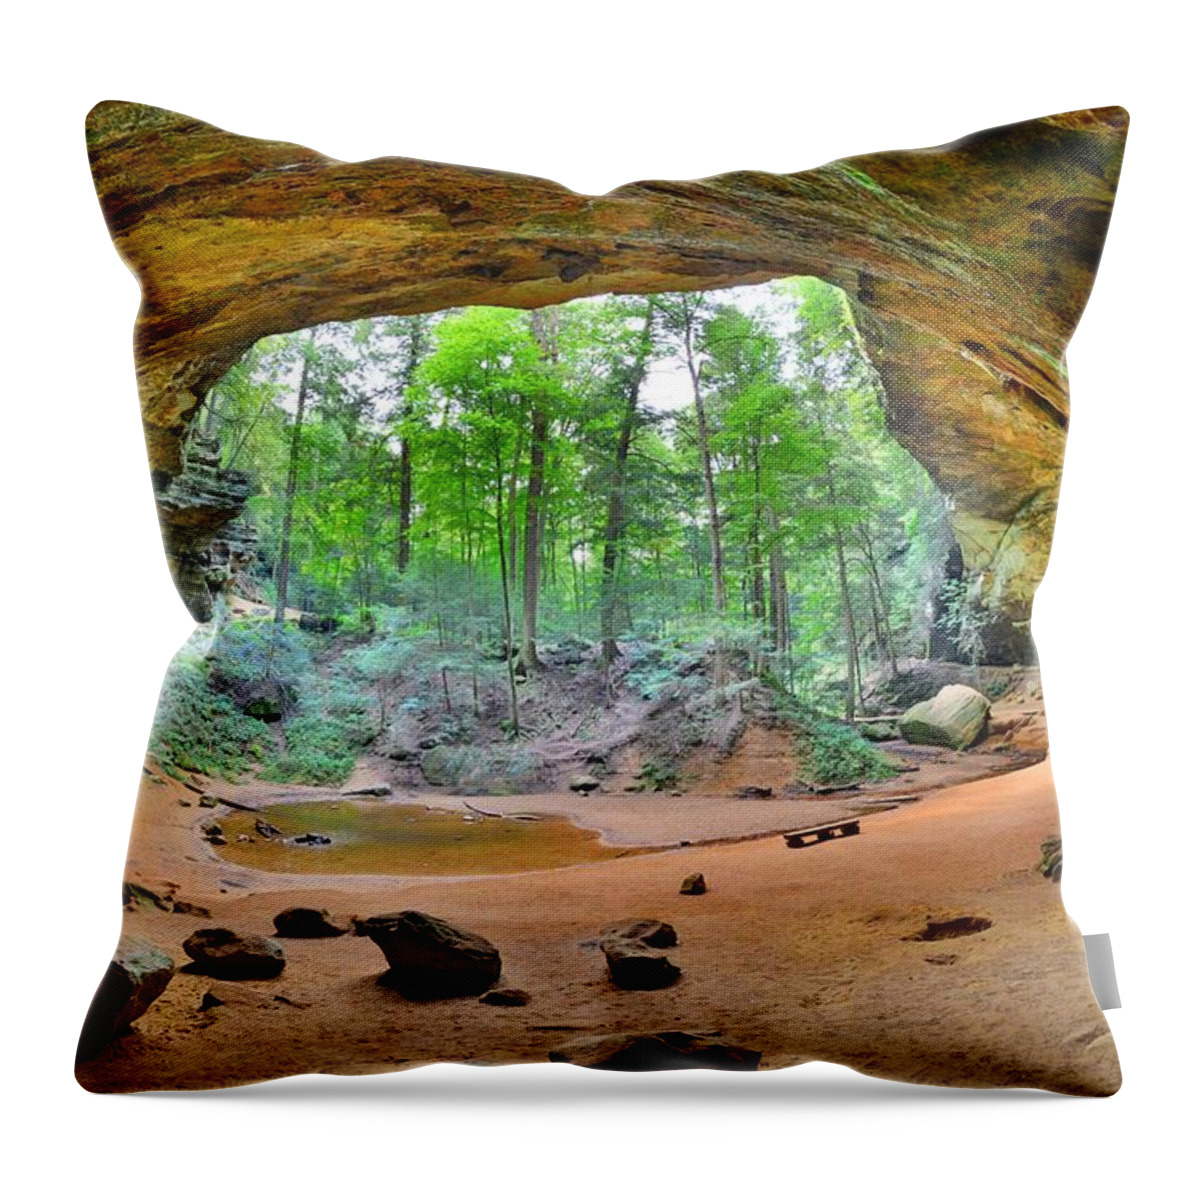 Looking Out Of Ash Cave Hocking Hills Ohio Throw Pillow featuring the photograph Looking Out Of Ash Cave Hocking Hills Ohio by Lisa Wooten